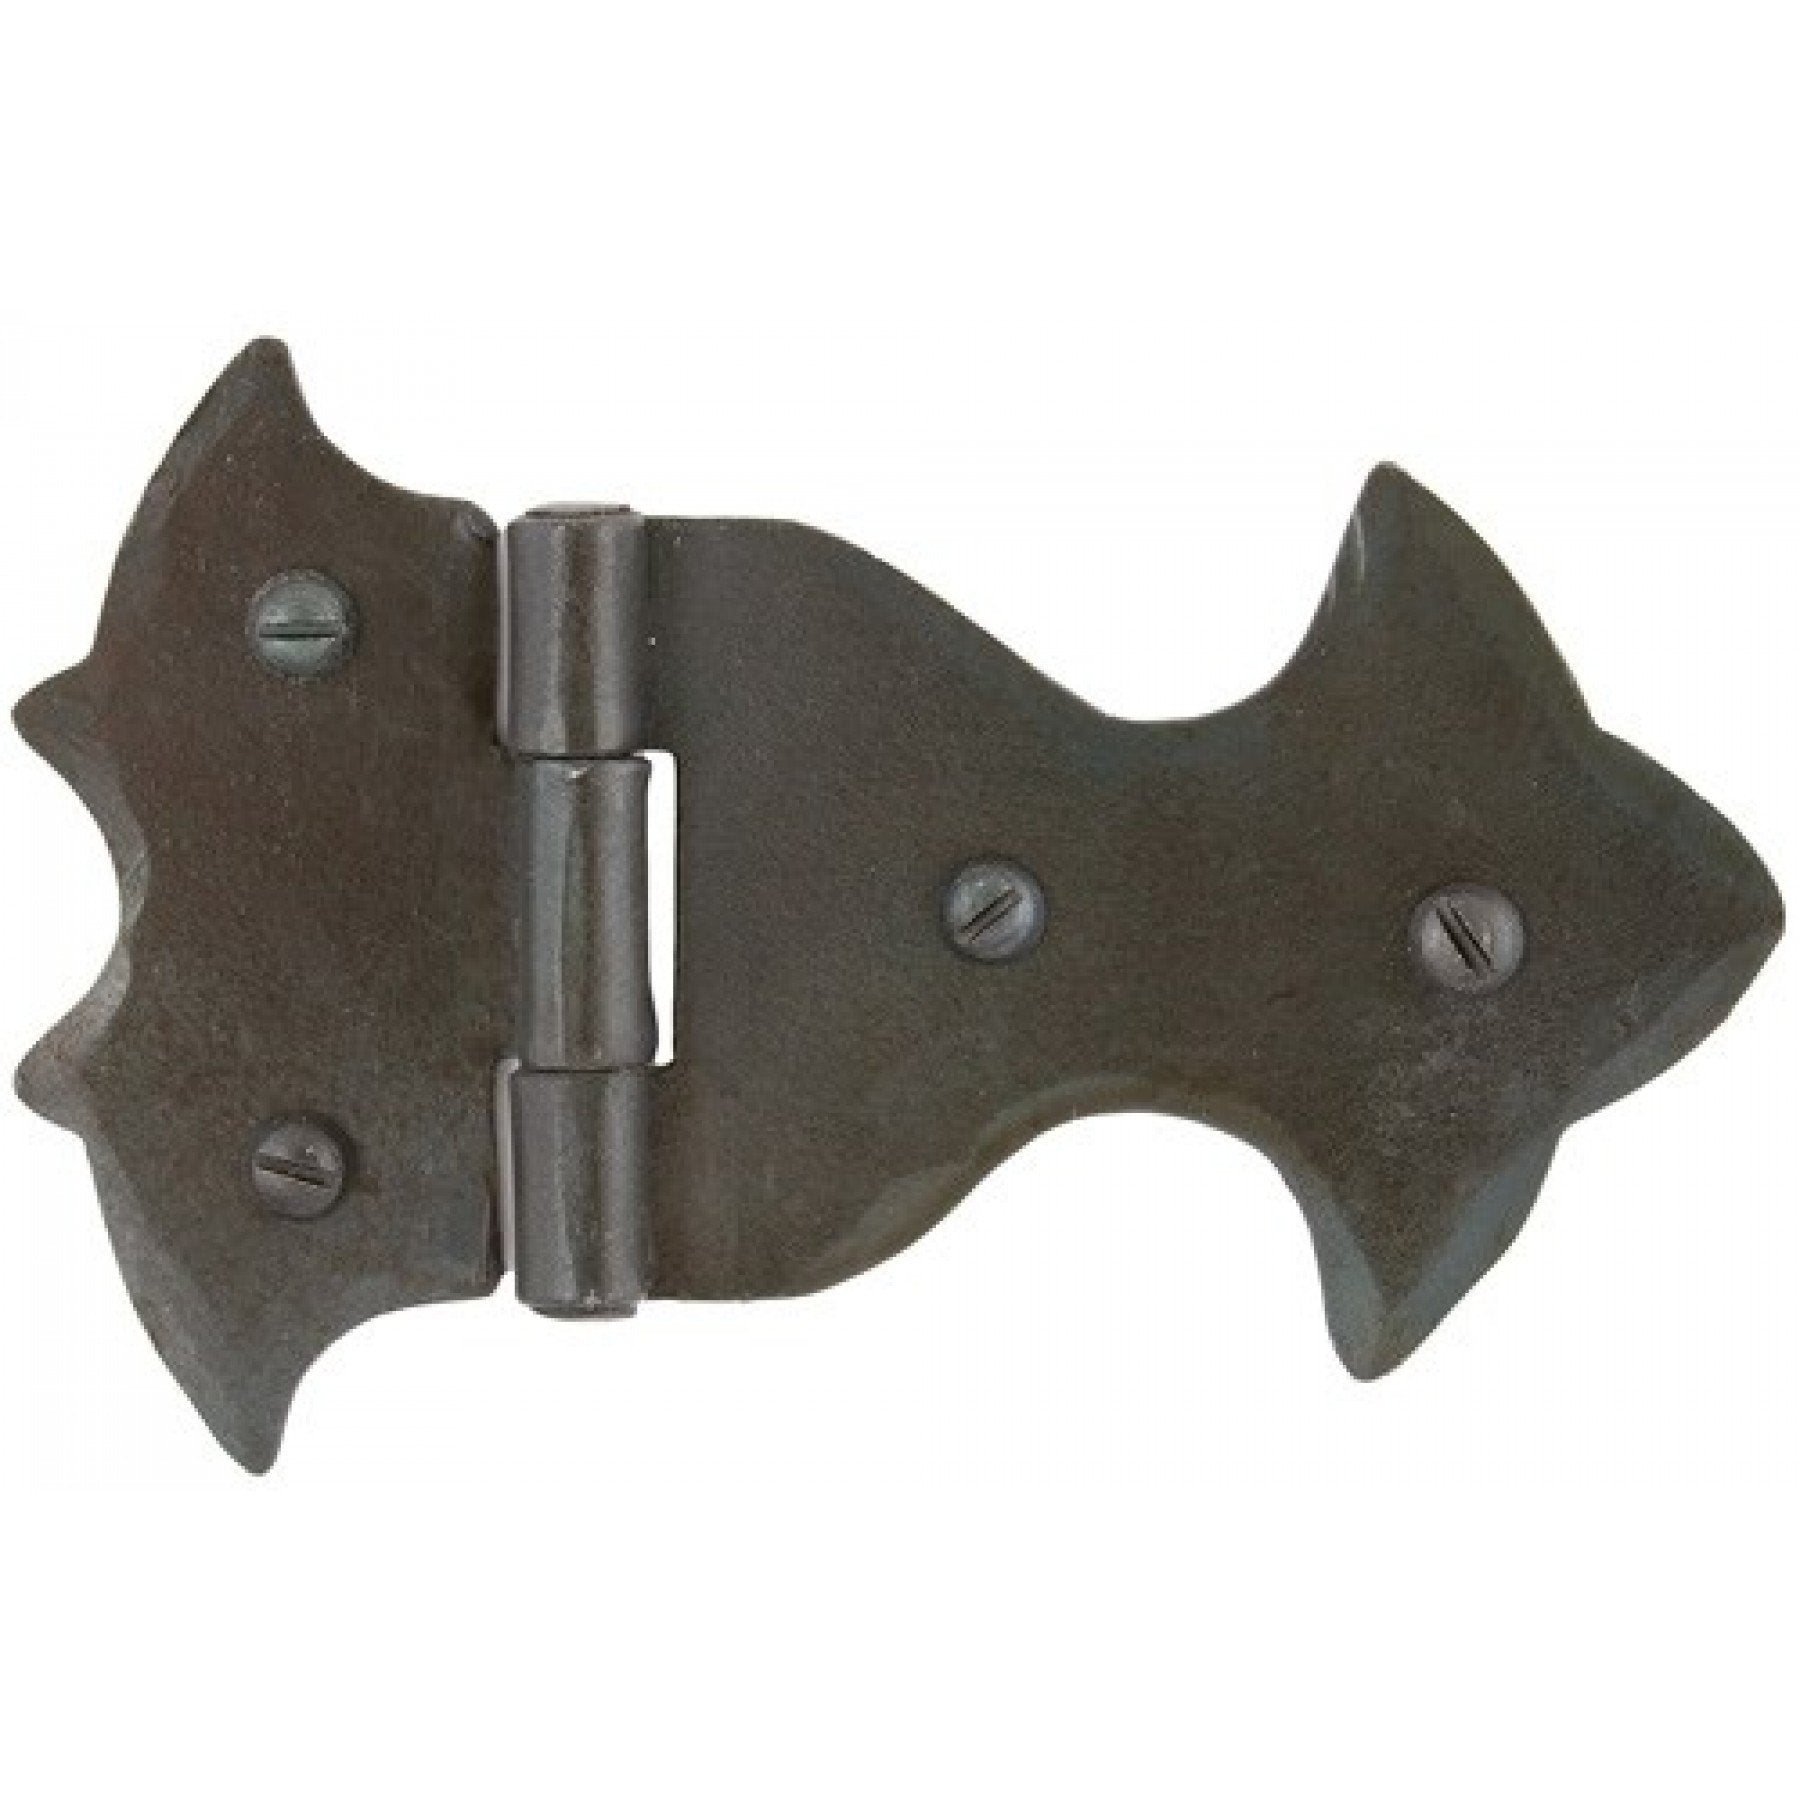 From the Anvil Beeswax Ornate Hinge (pair)